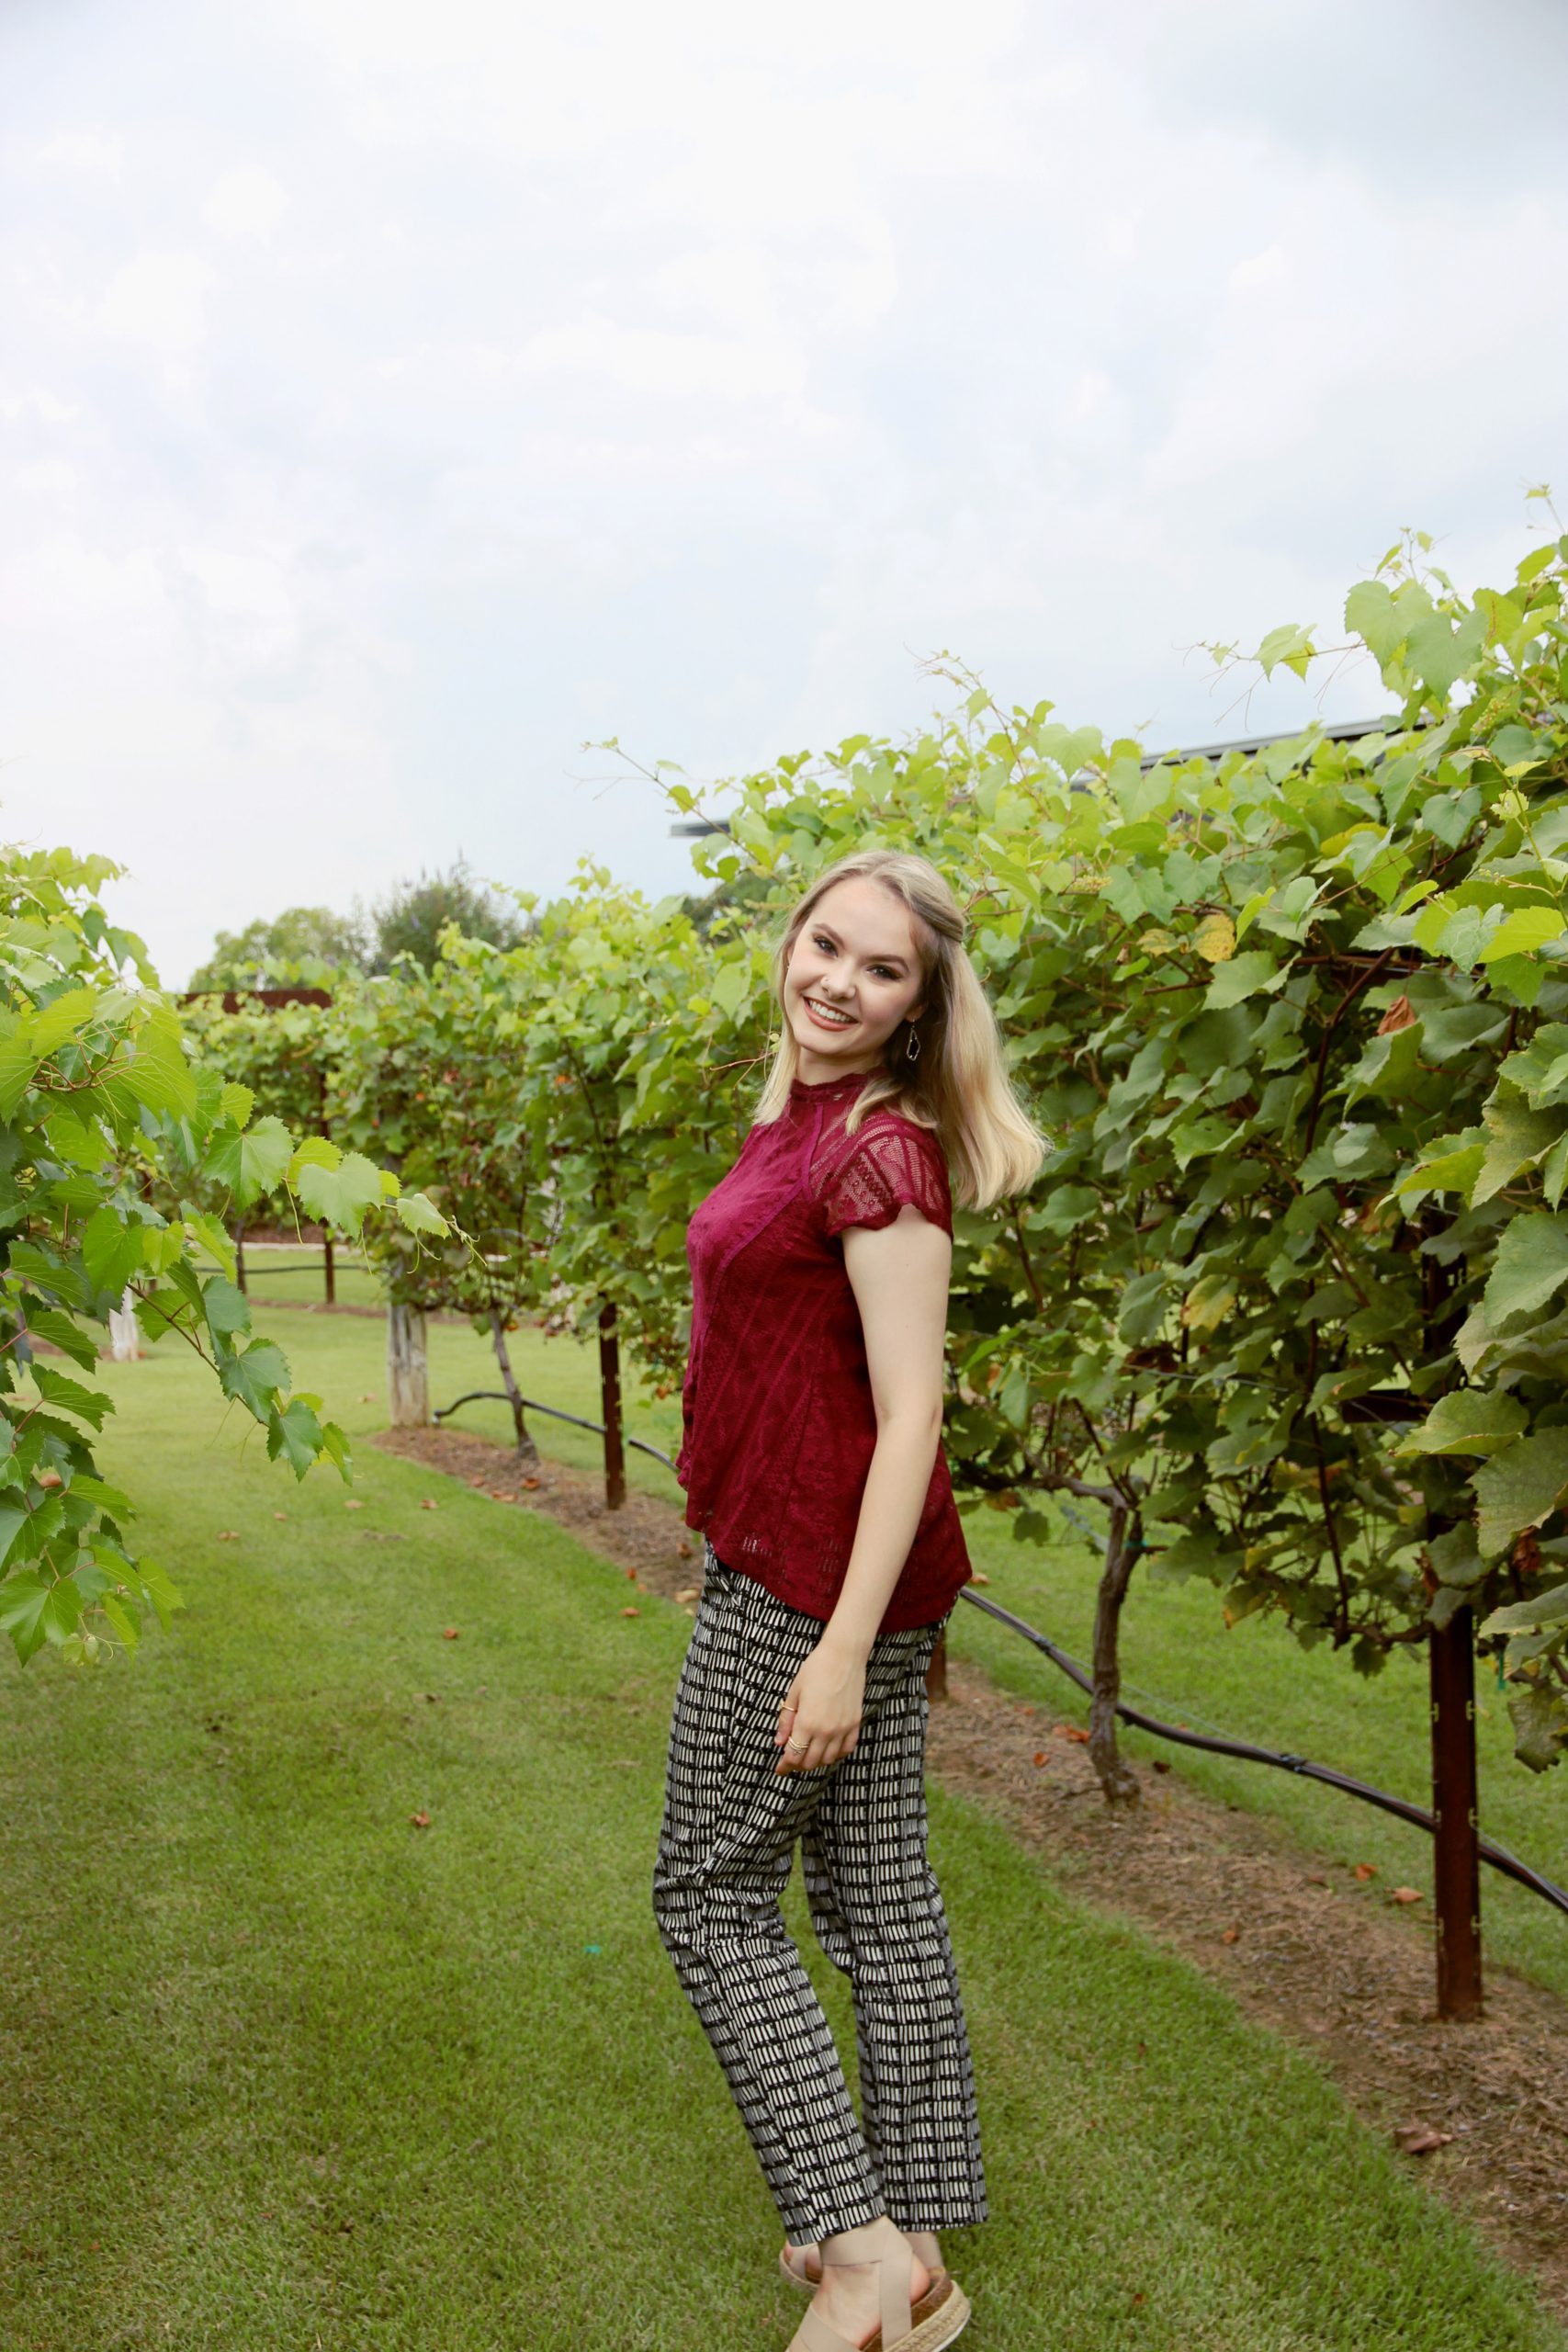 Natalie Parks takes a stroll through the grape vines in The Gardens on campus.